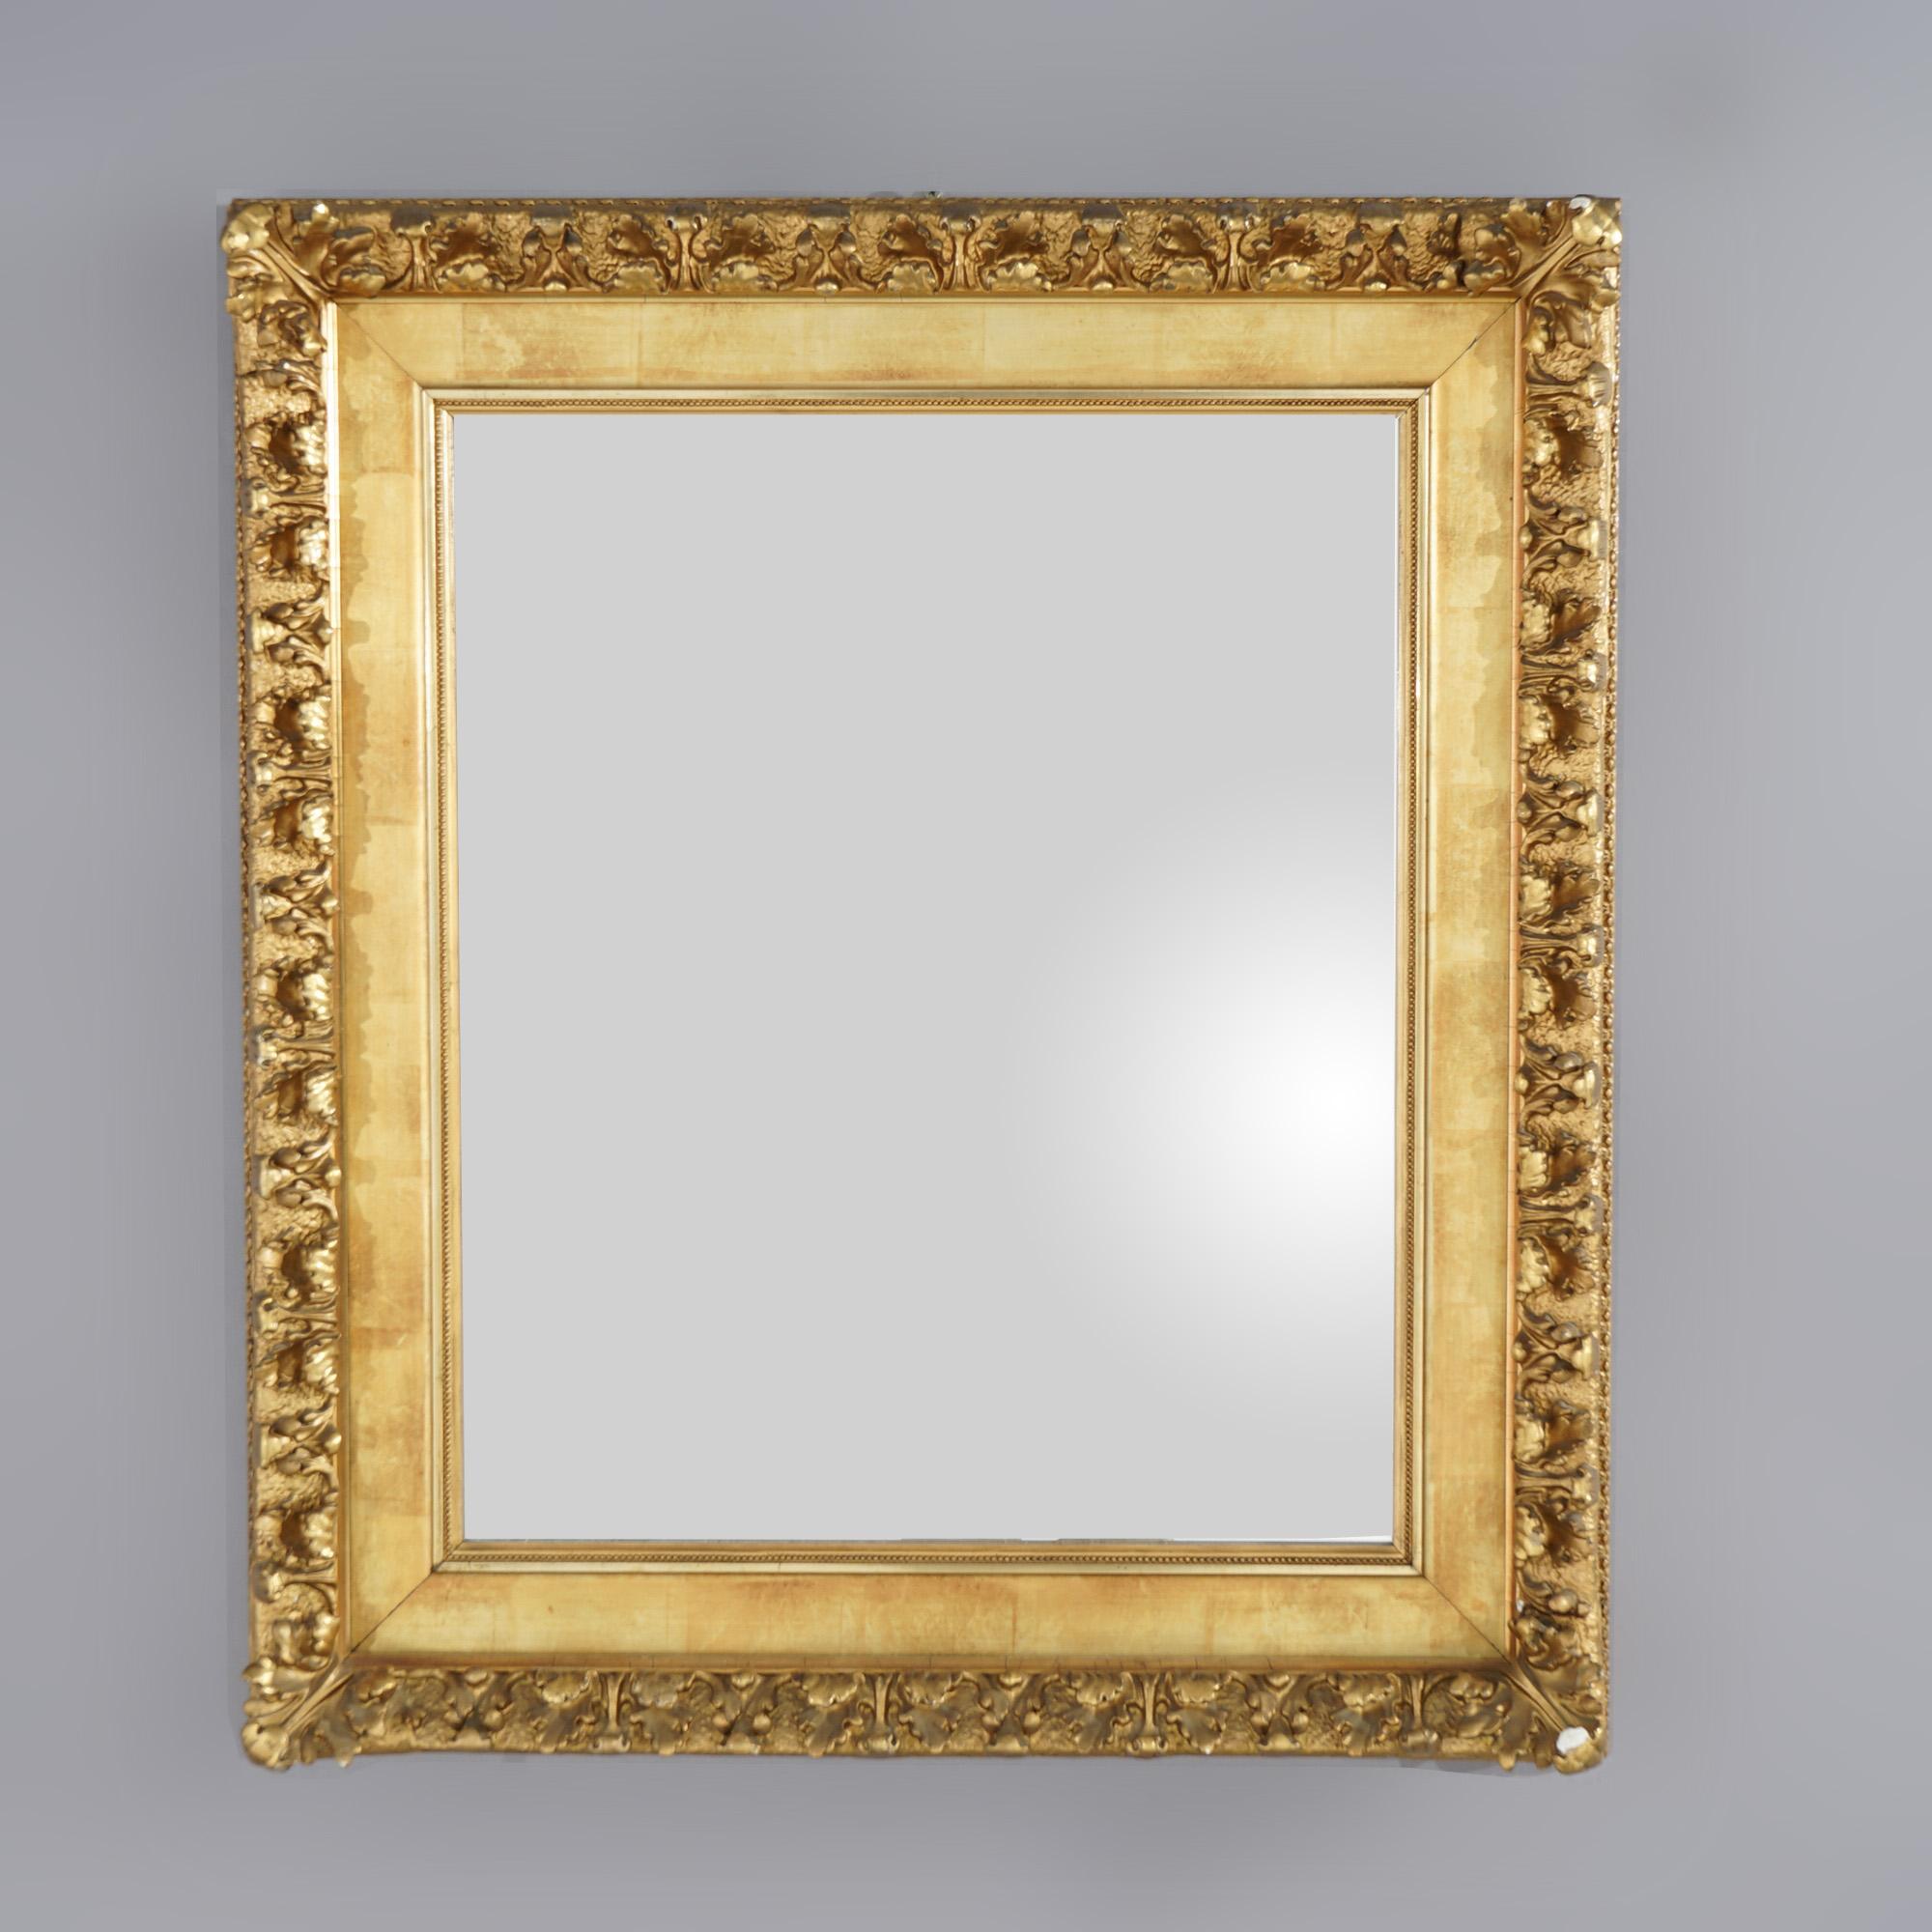 An antique wall mirror offers giltwood construction with high relief foliate elements, 19th century

Measures - 42